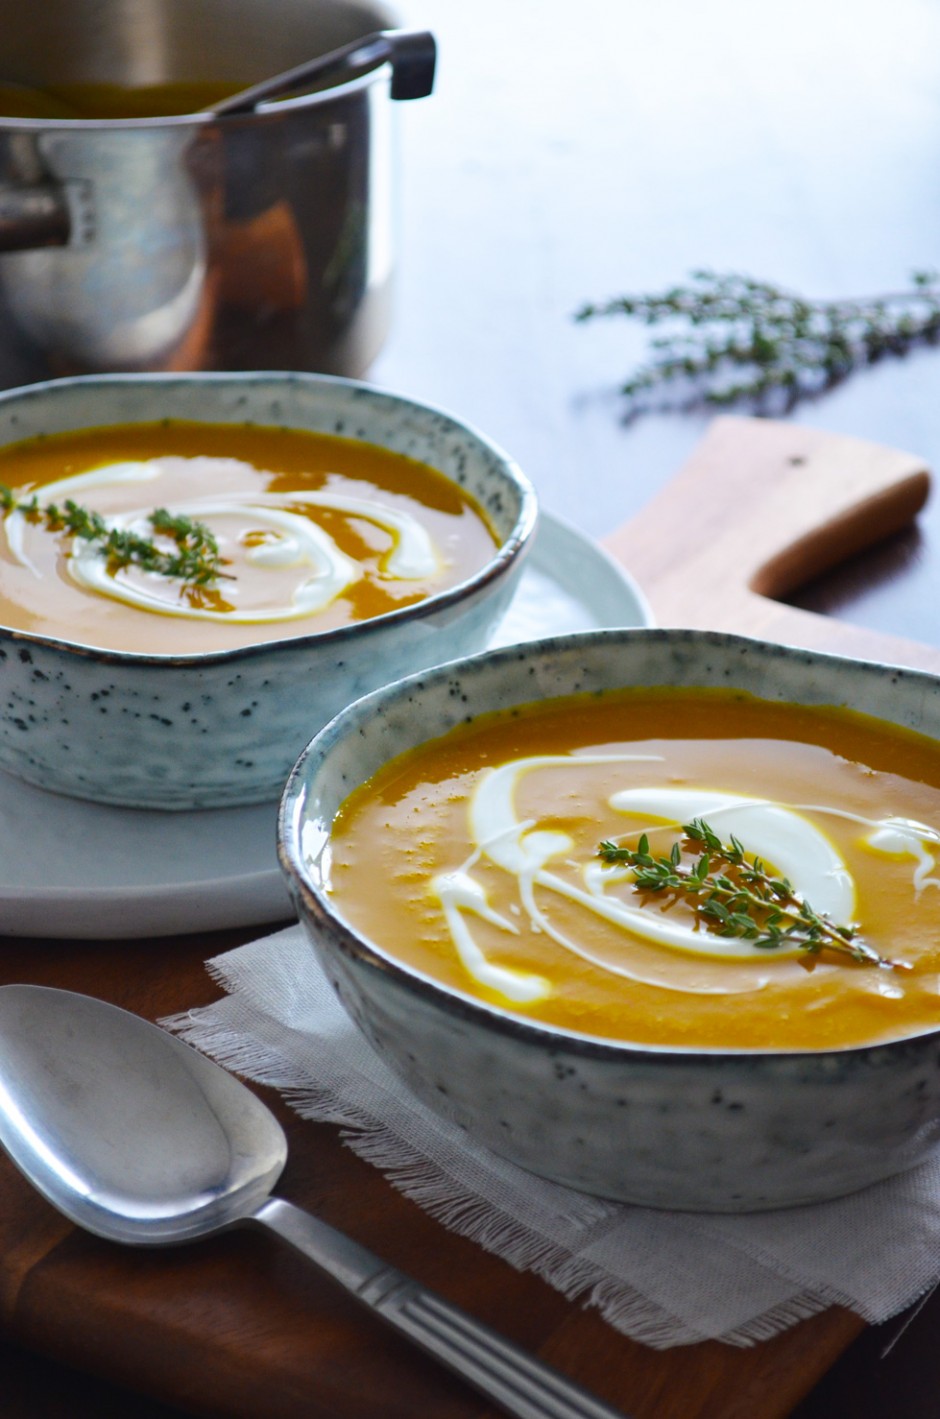 A recipe for Pumpkin Soup with Harissa and Orange. This soup is great to enjoy as lunch or as a light post-holiday dinner. The spicy Harissa paste and the orange juice and zest give the soup a North-African/Middle Eastern vibe. Recipe by That Healthy Kitchen